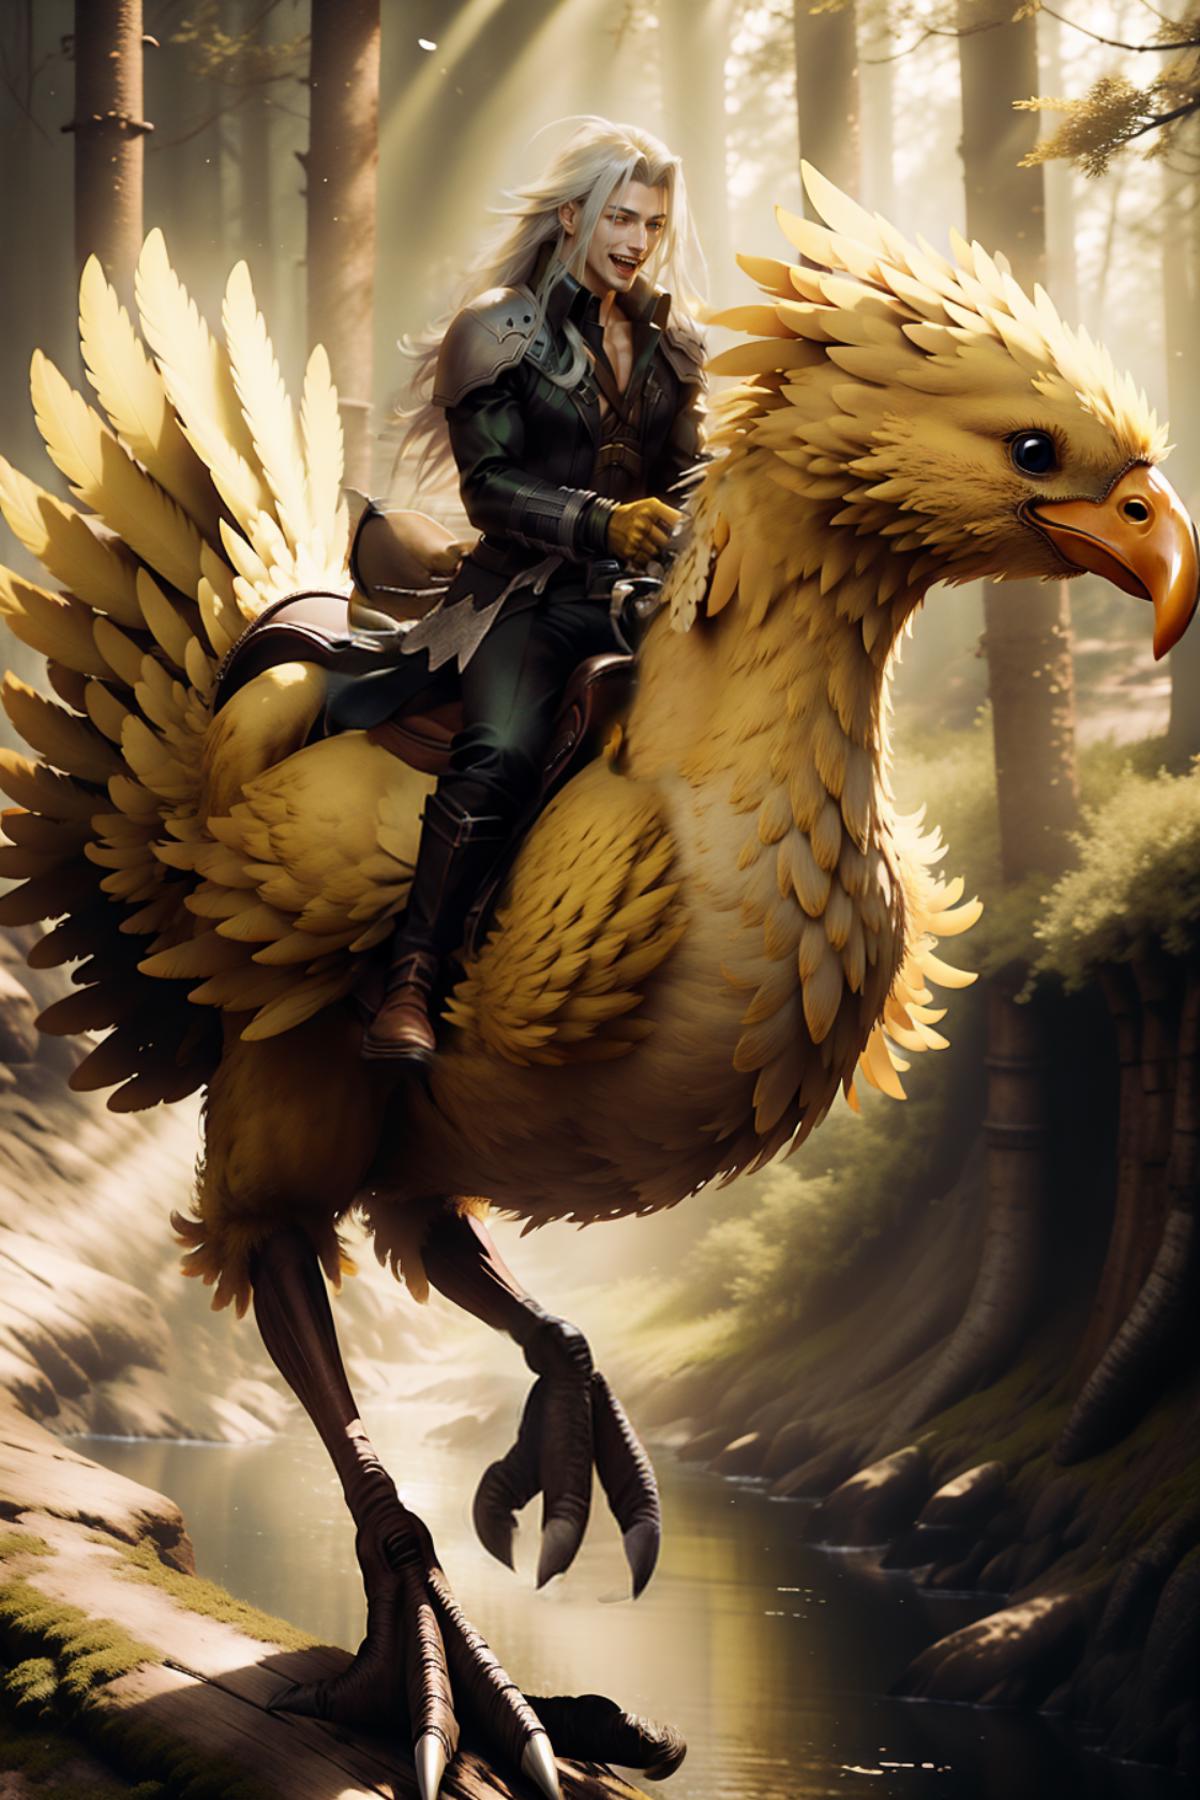 A person riding on a yellow and white bird in a forest.